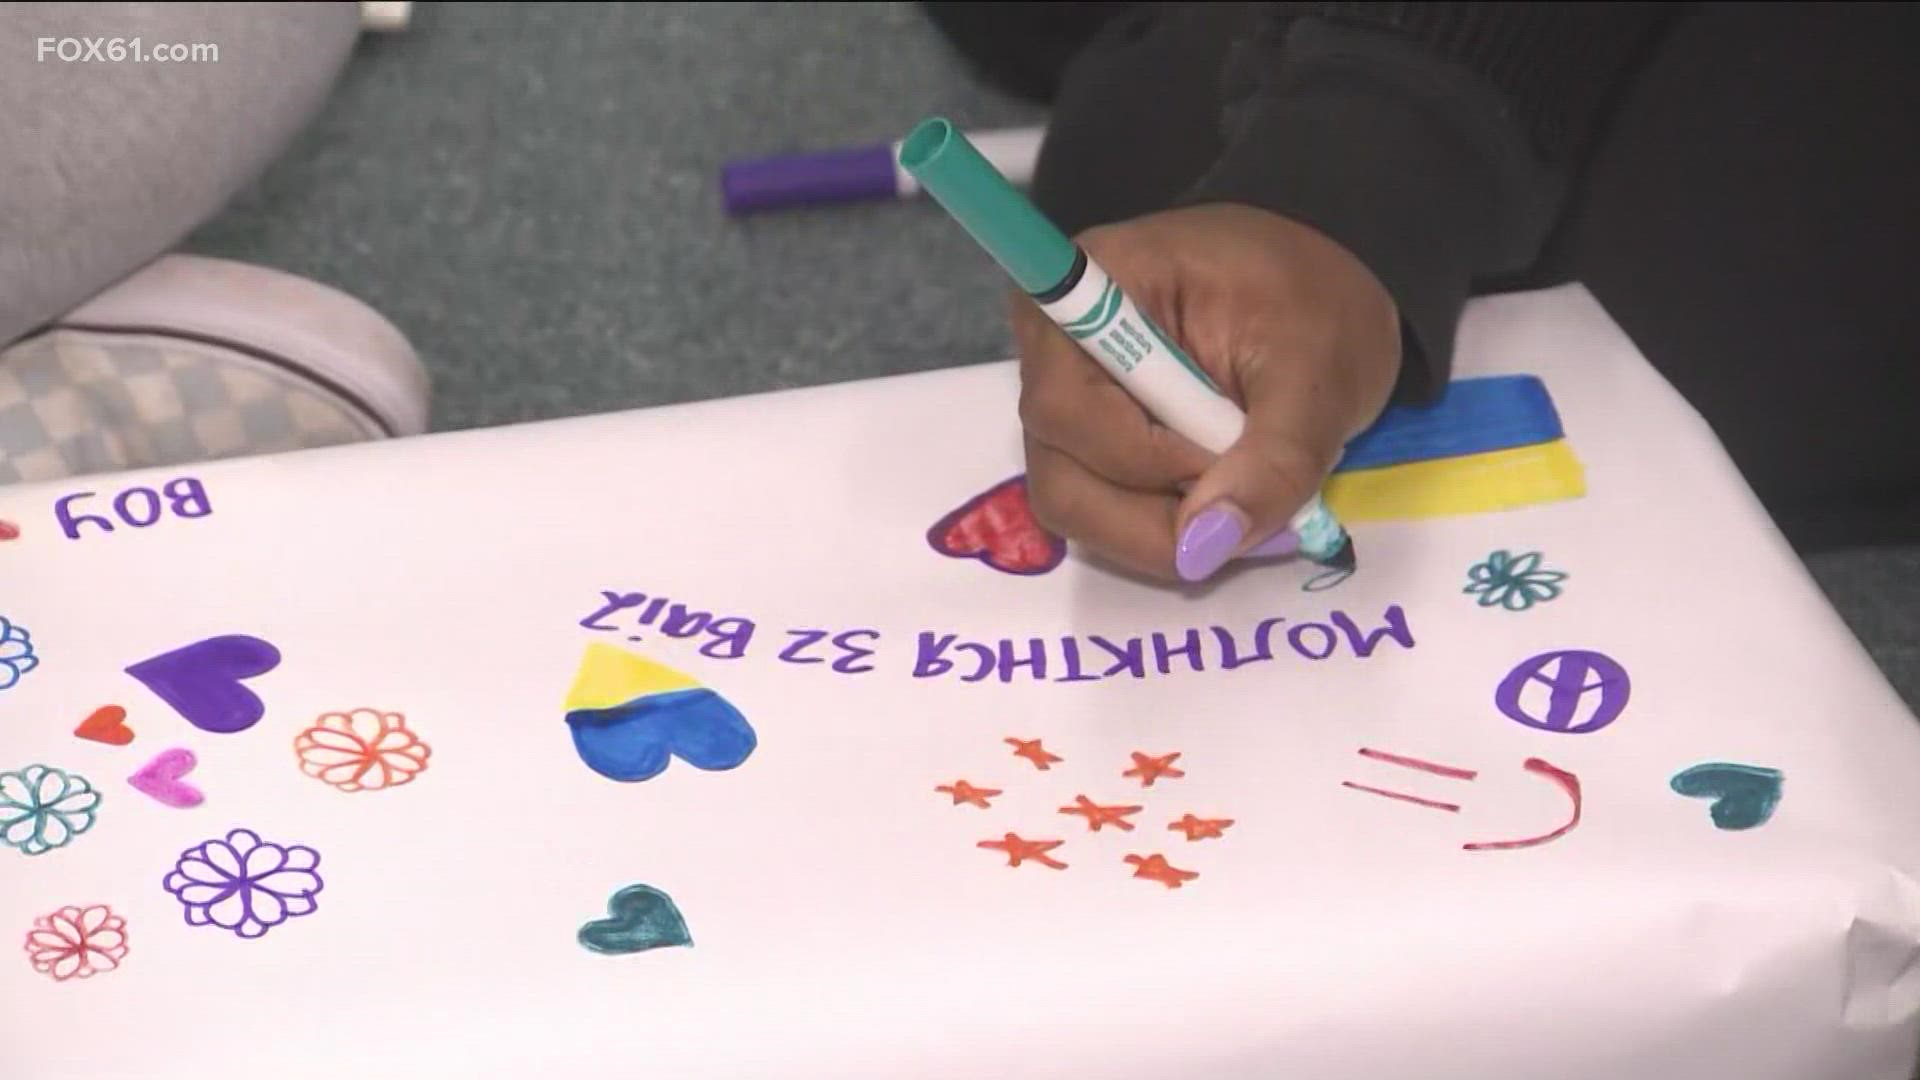 Reports state over 1 million children have fled their home country of Ukraine after war broke out. Students at Mercy High School decided to send gifts of love.